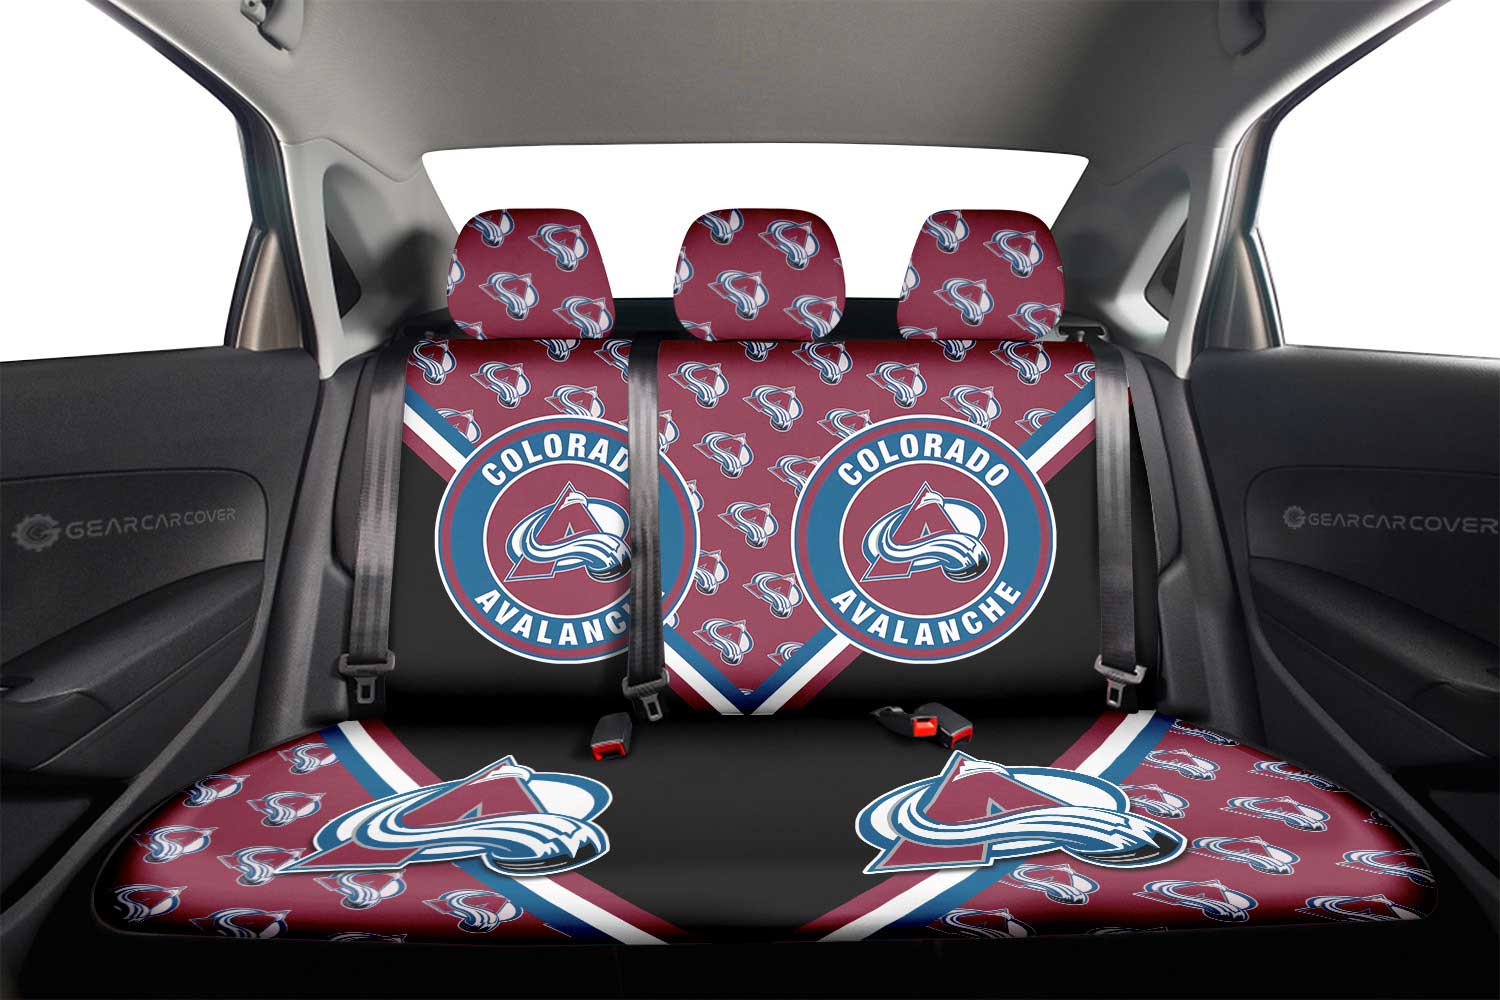 Colorado Avalanche Car Back Seat Cover Custom Car Accessories For Fans - Gearcarcover - 2